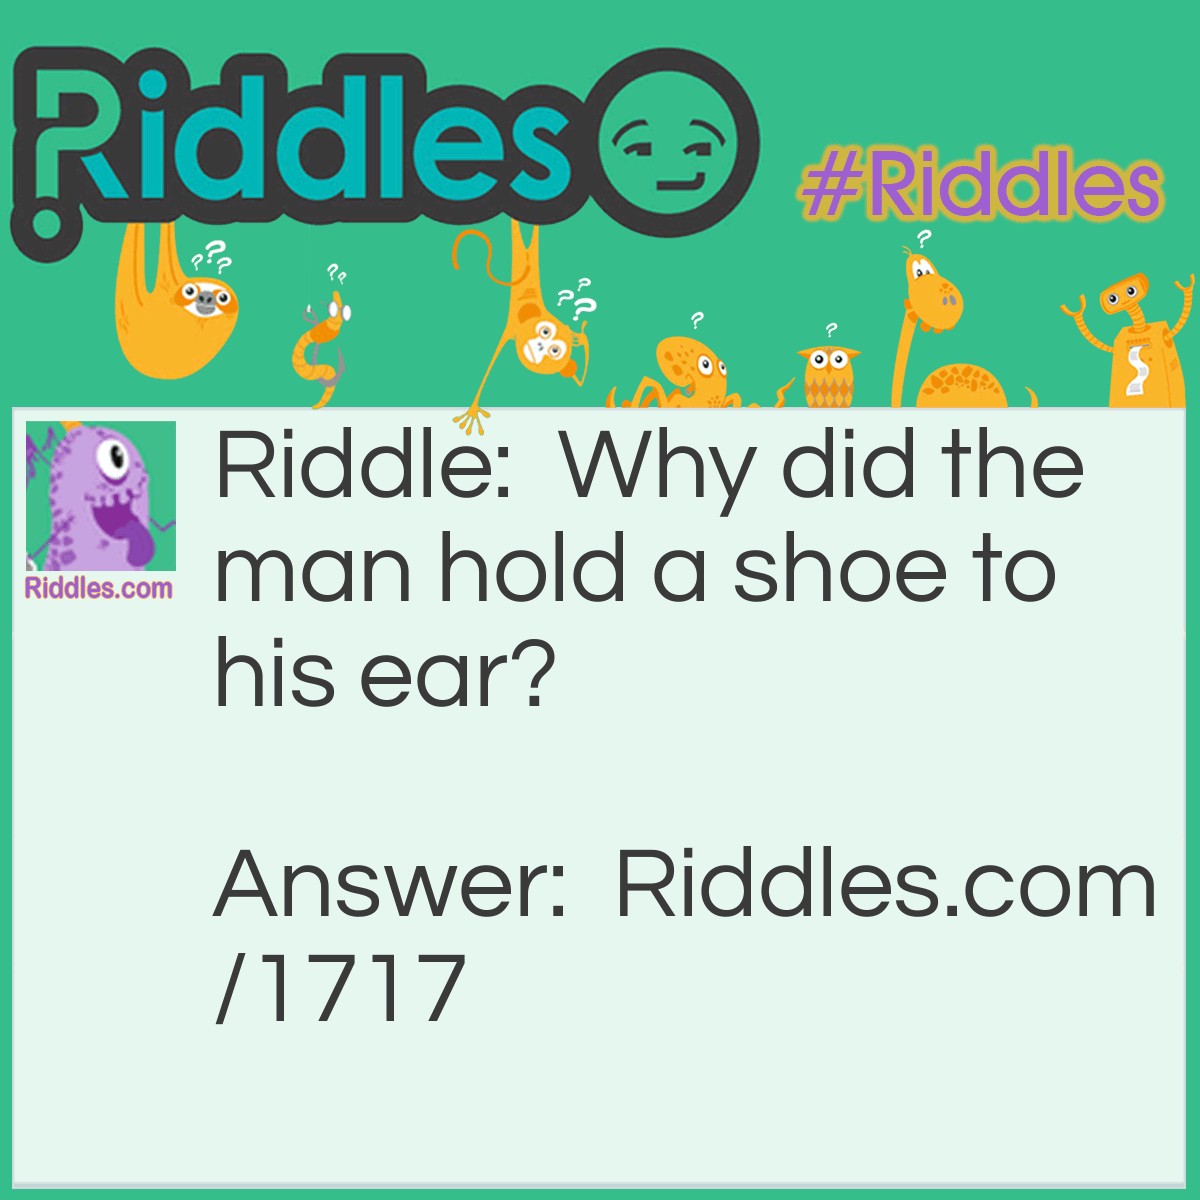 Riddle: Why did the man hold a shoe to his ear? Answer: Because he was listening to sole music.